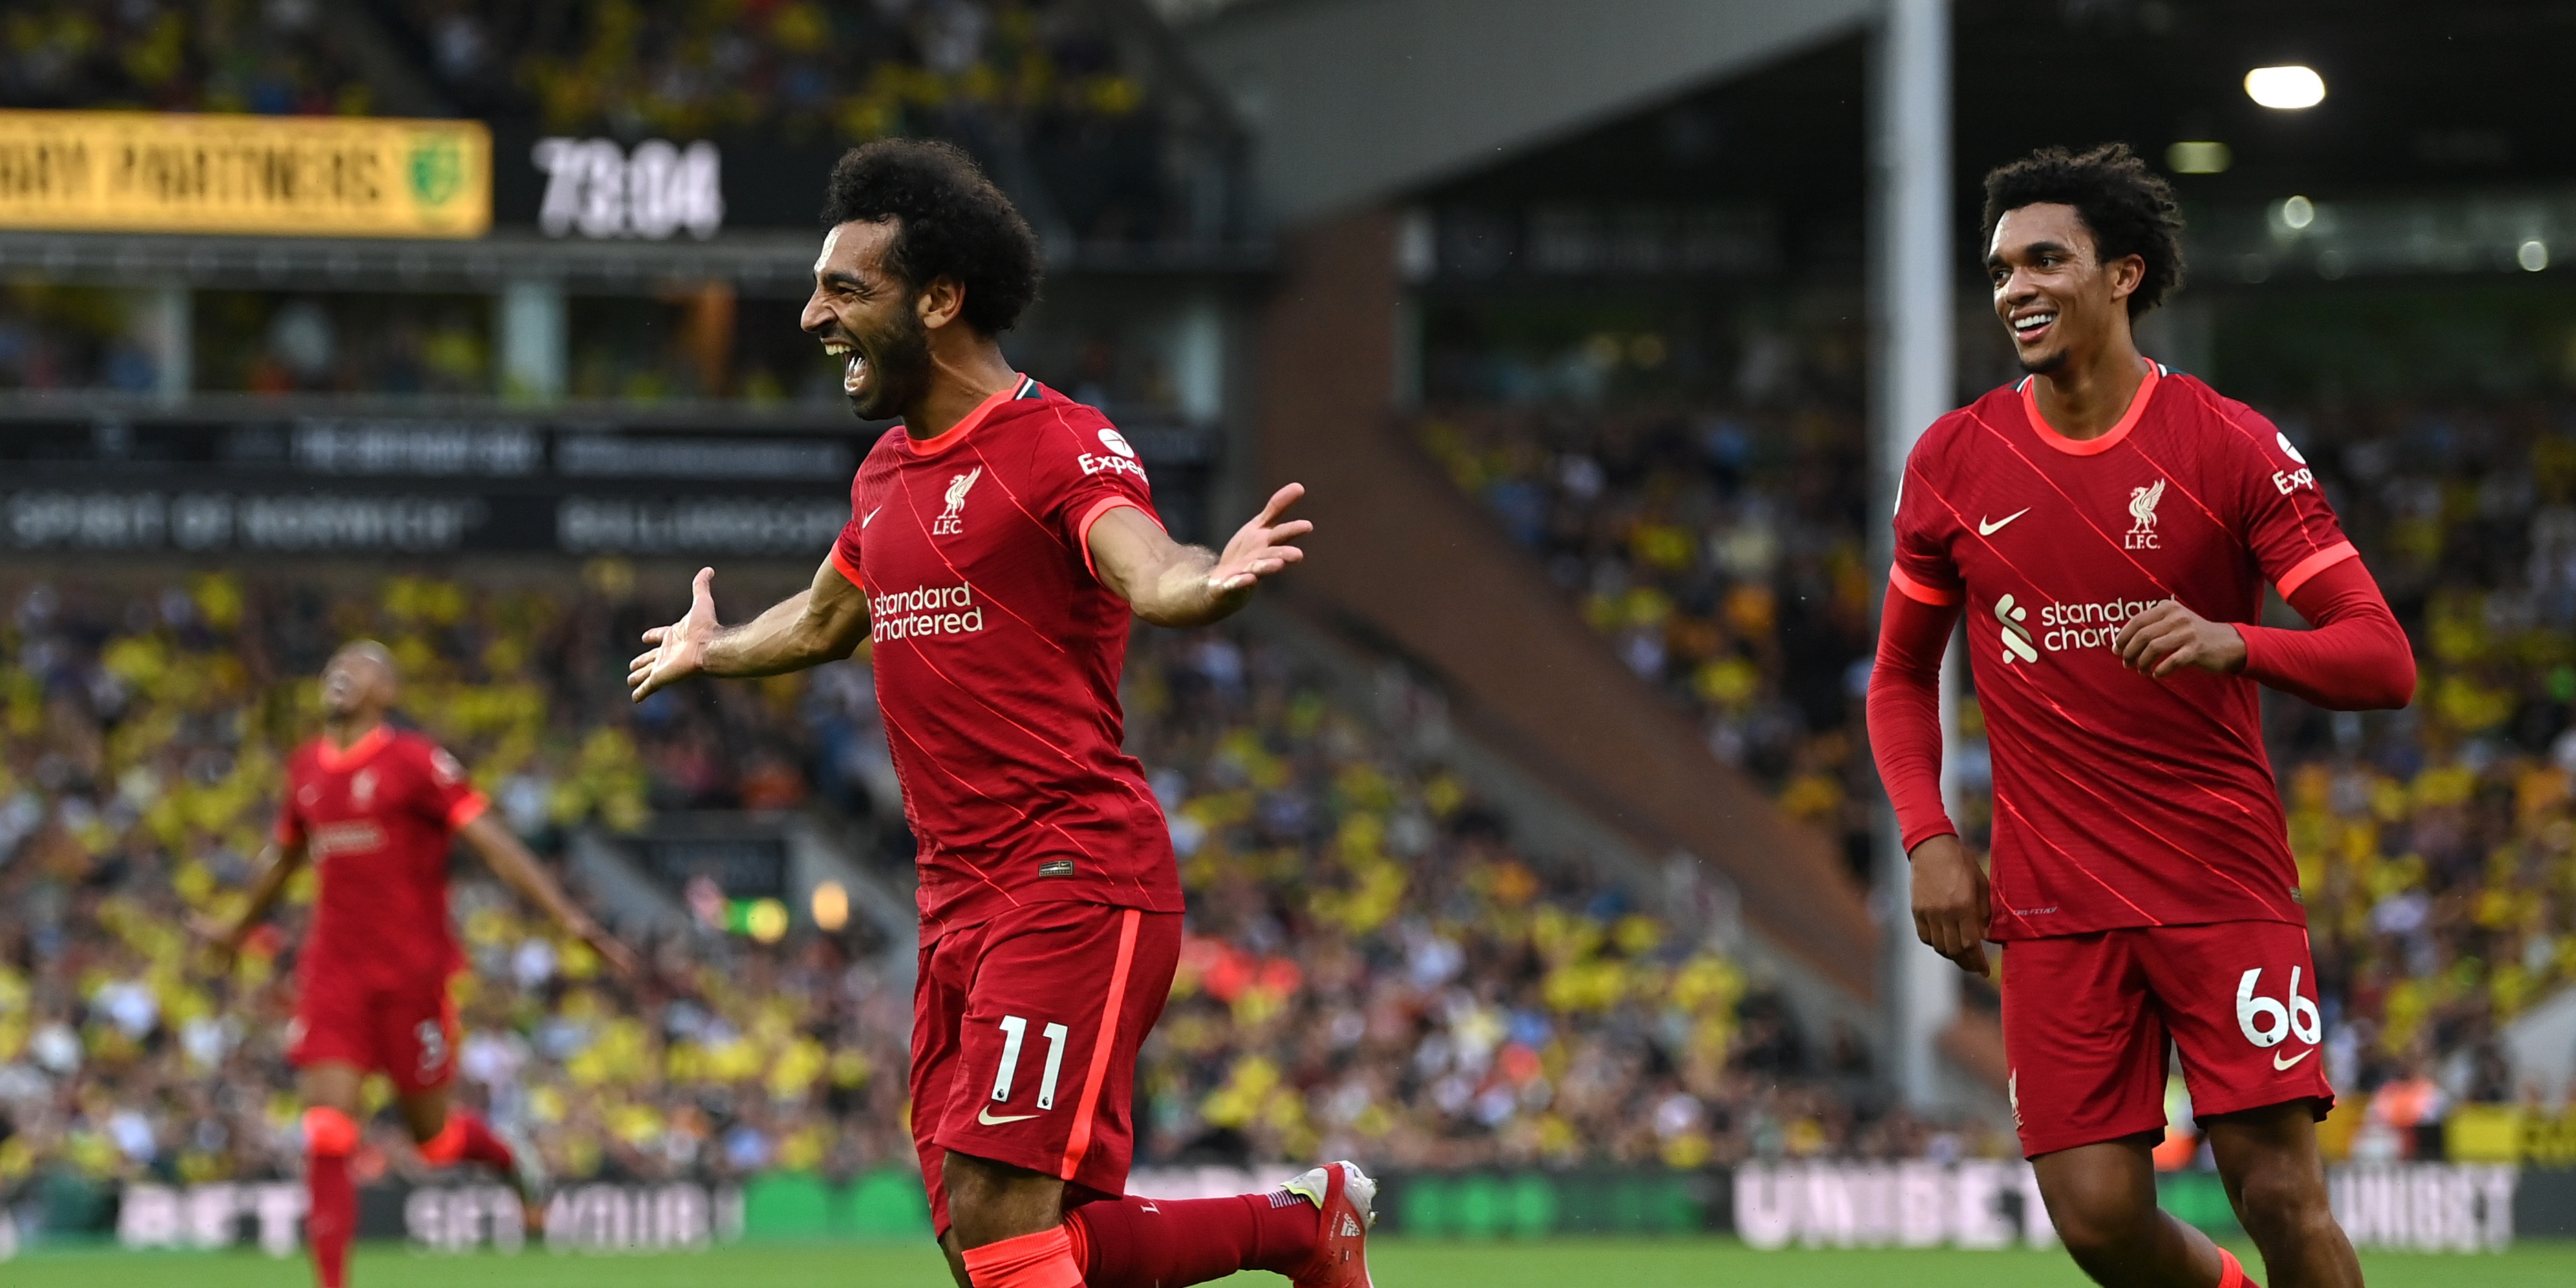 ‘It’s getting ridiculous’ – Trent blown away by ‘frightening’ Mo Salah’s Liverpool form